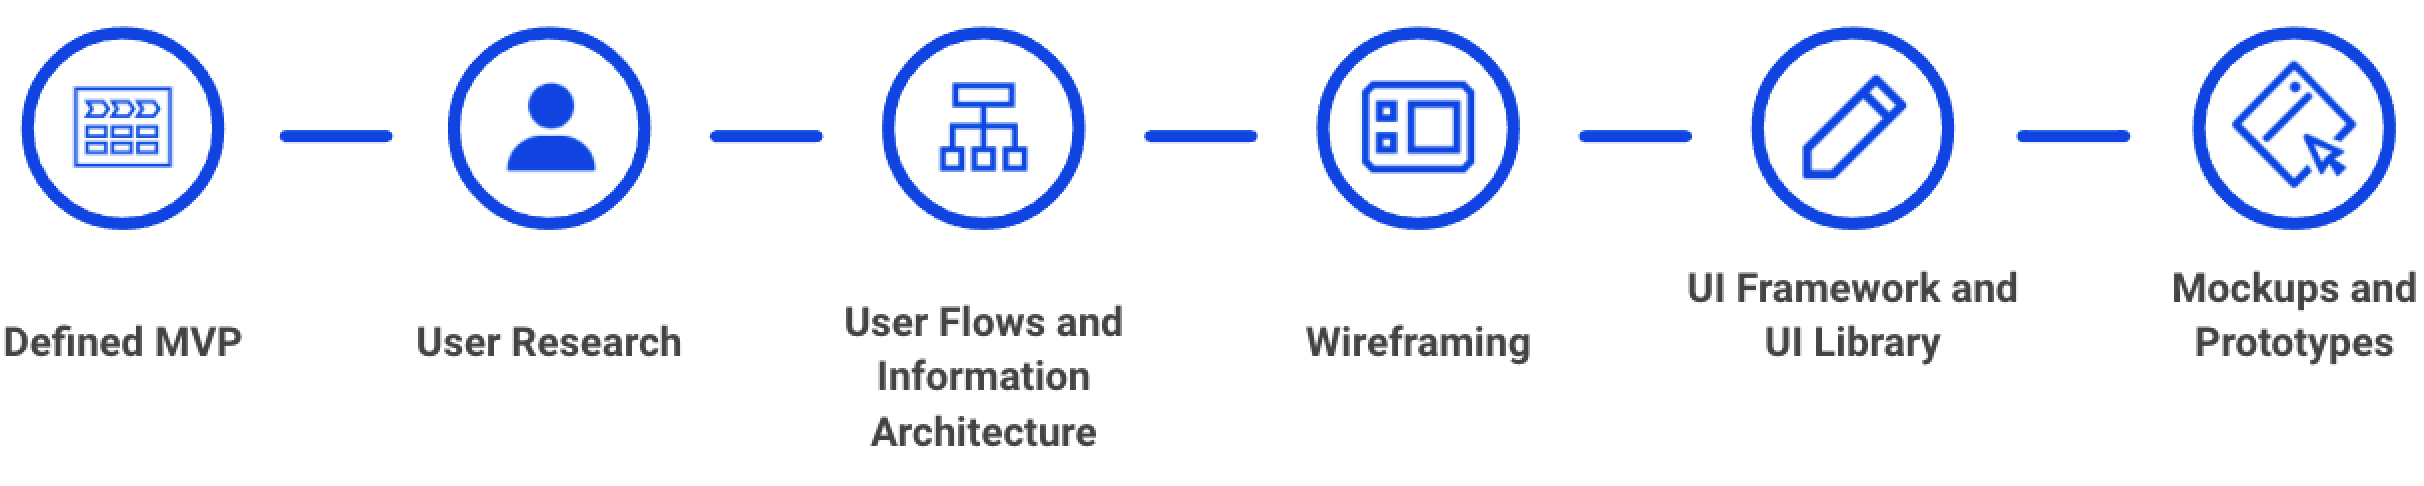 Diagram showing process consisting of MVP definition, user research, user flows and information architecture, wireframing, UI framework and library, and mockups and prototypes